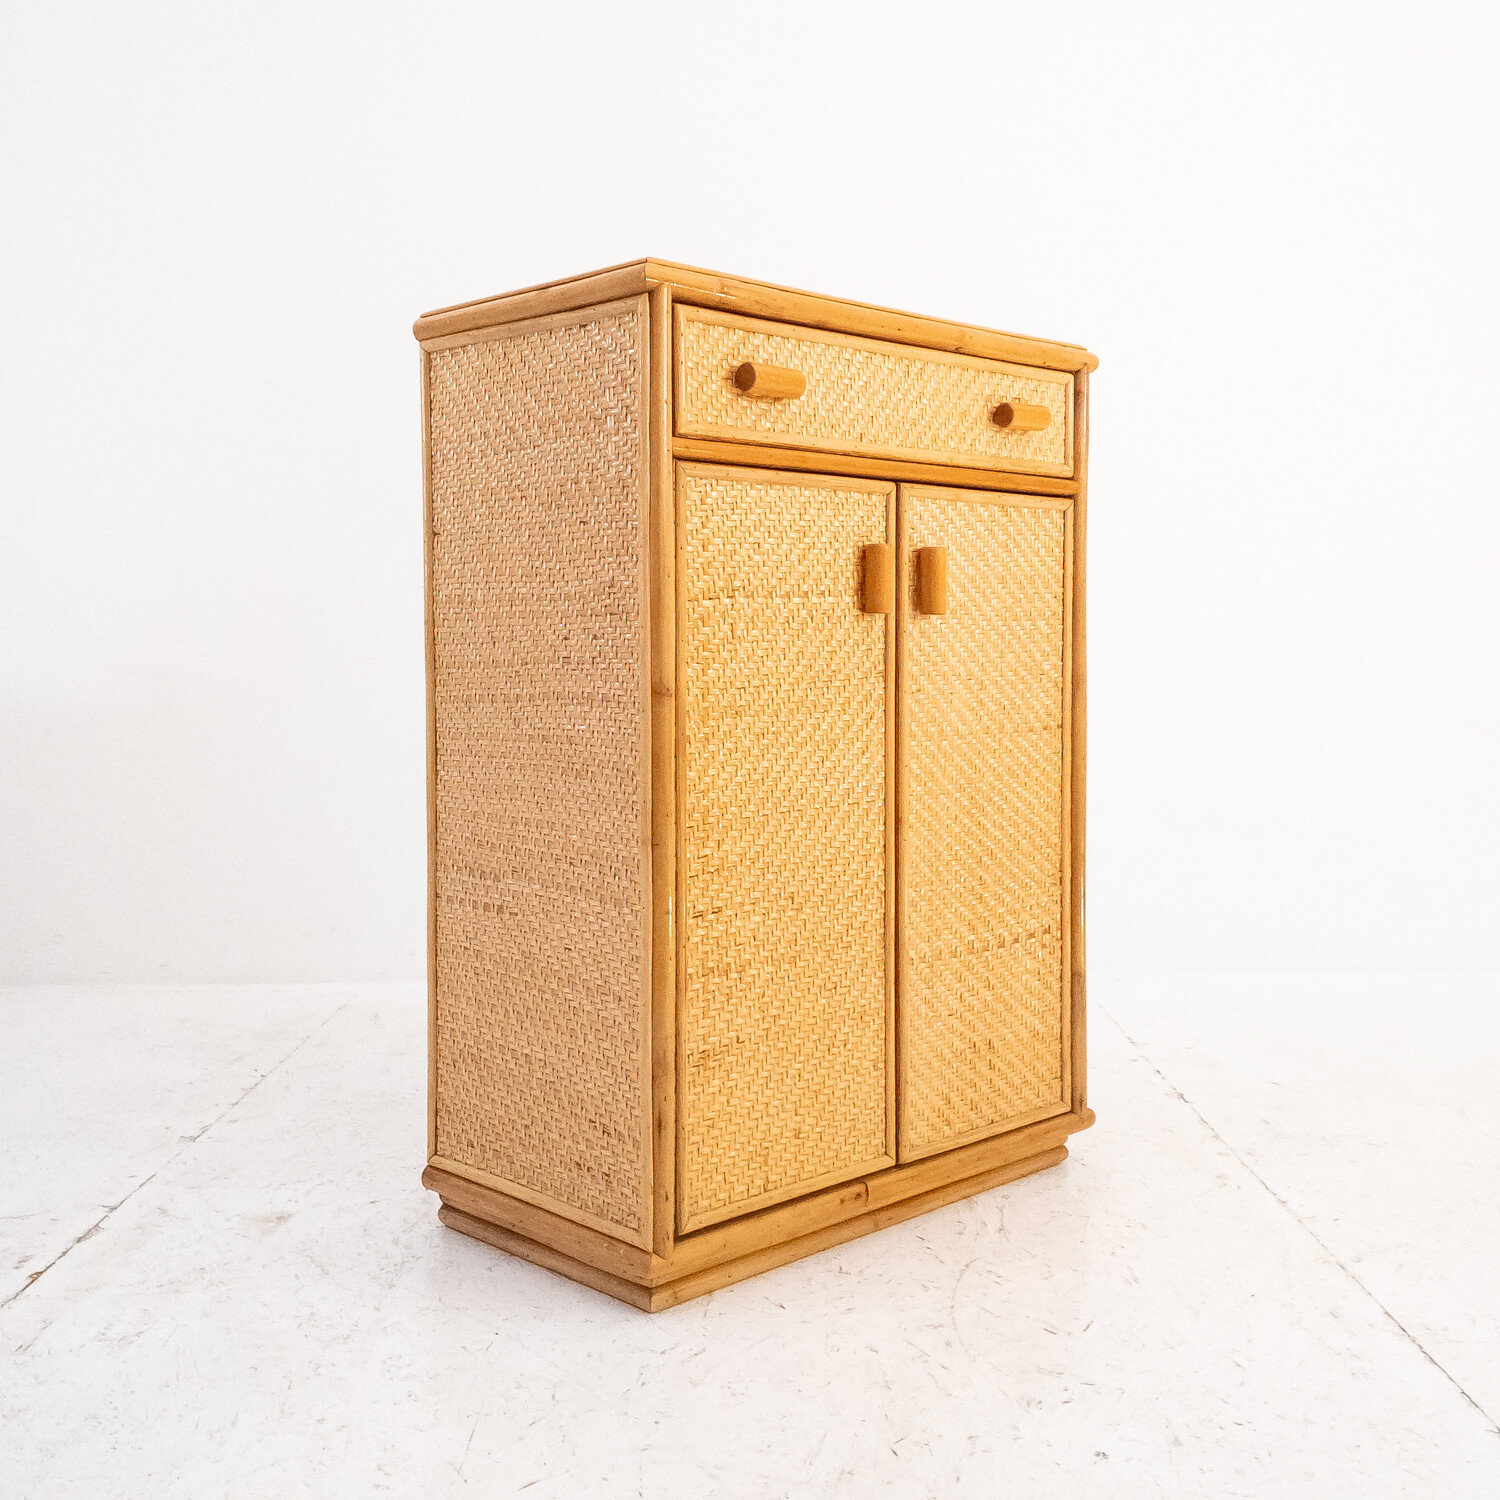 Storage unit in bamboo and rattan, Italy 1970s